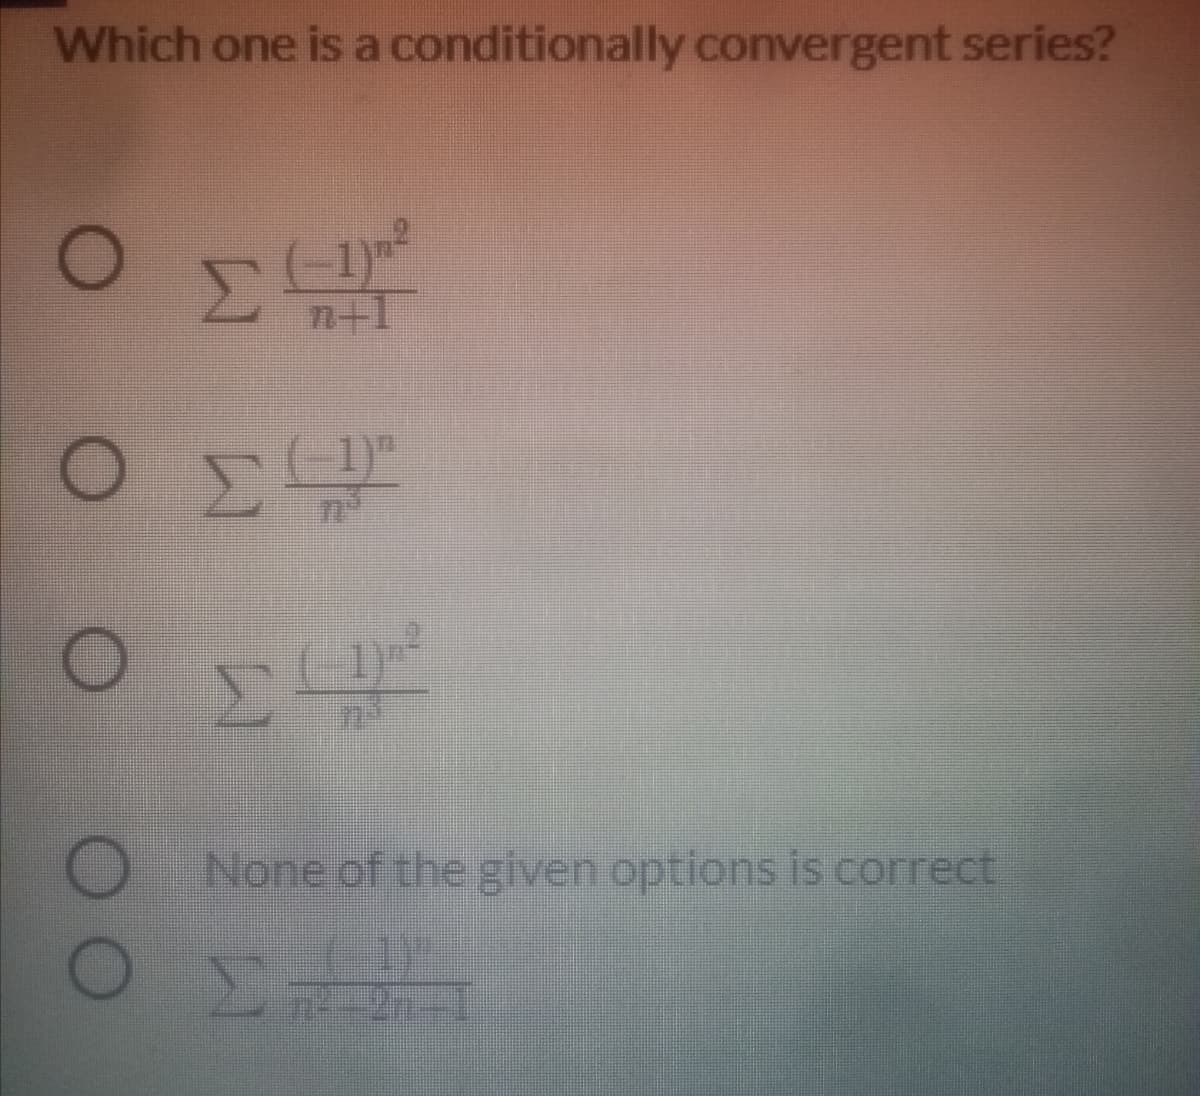 Which one is a conditionally convergent series?
n+1
Ο ΣΗ
None of the given options is correct
